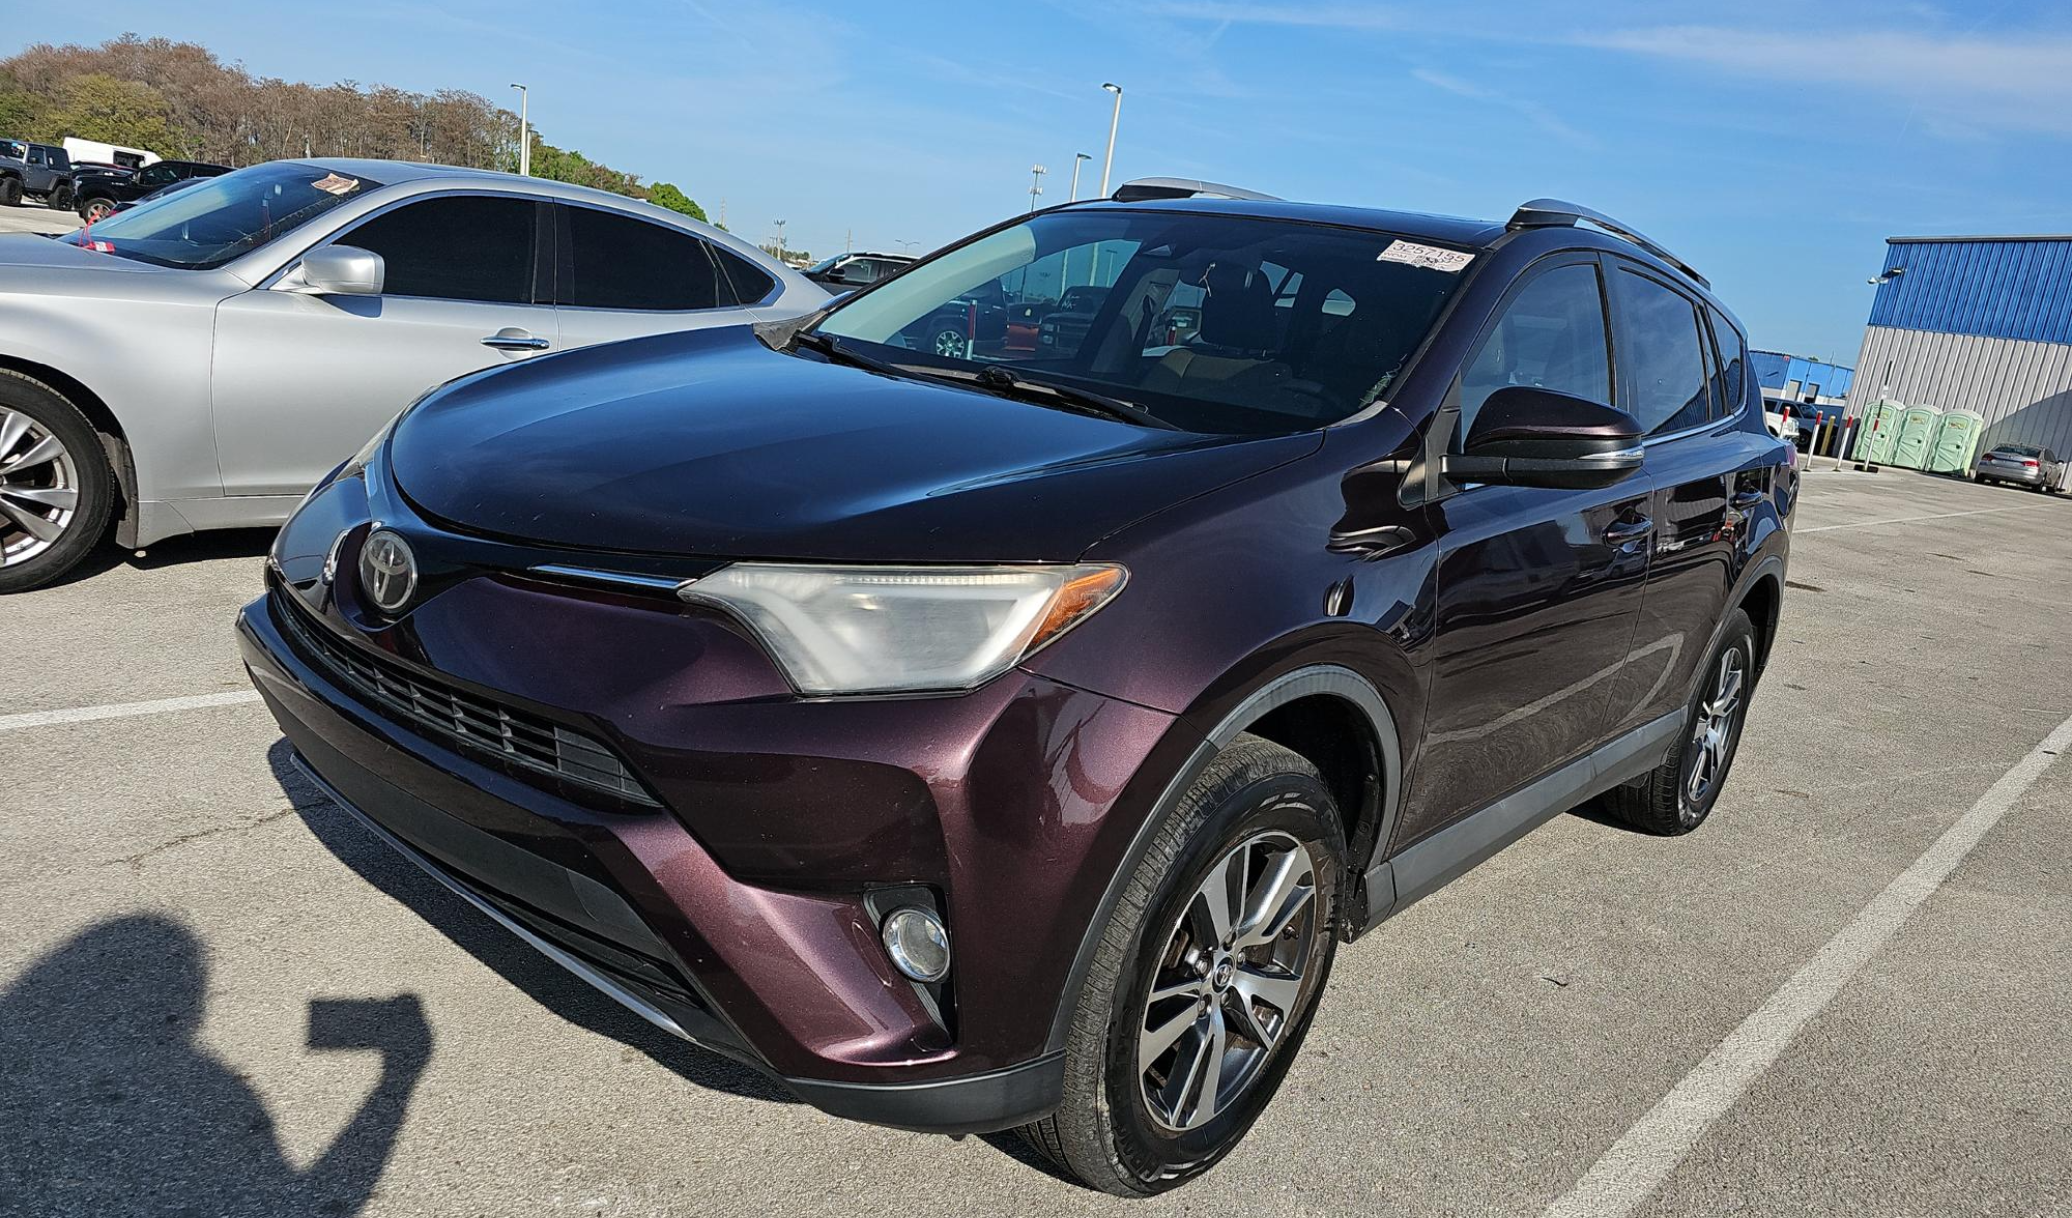 2018 Toyota RAV4 for sale in Gainesville FL 32609 by Veneauto Cars